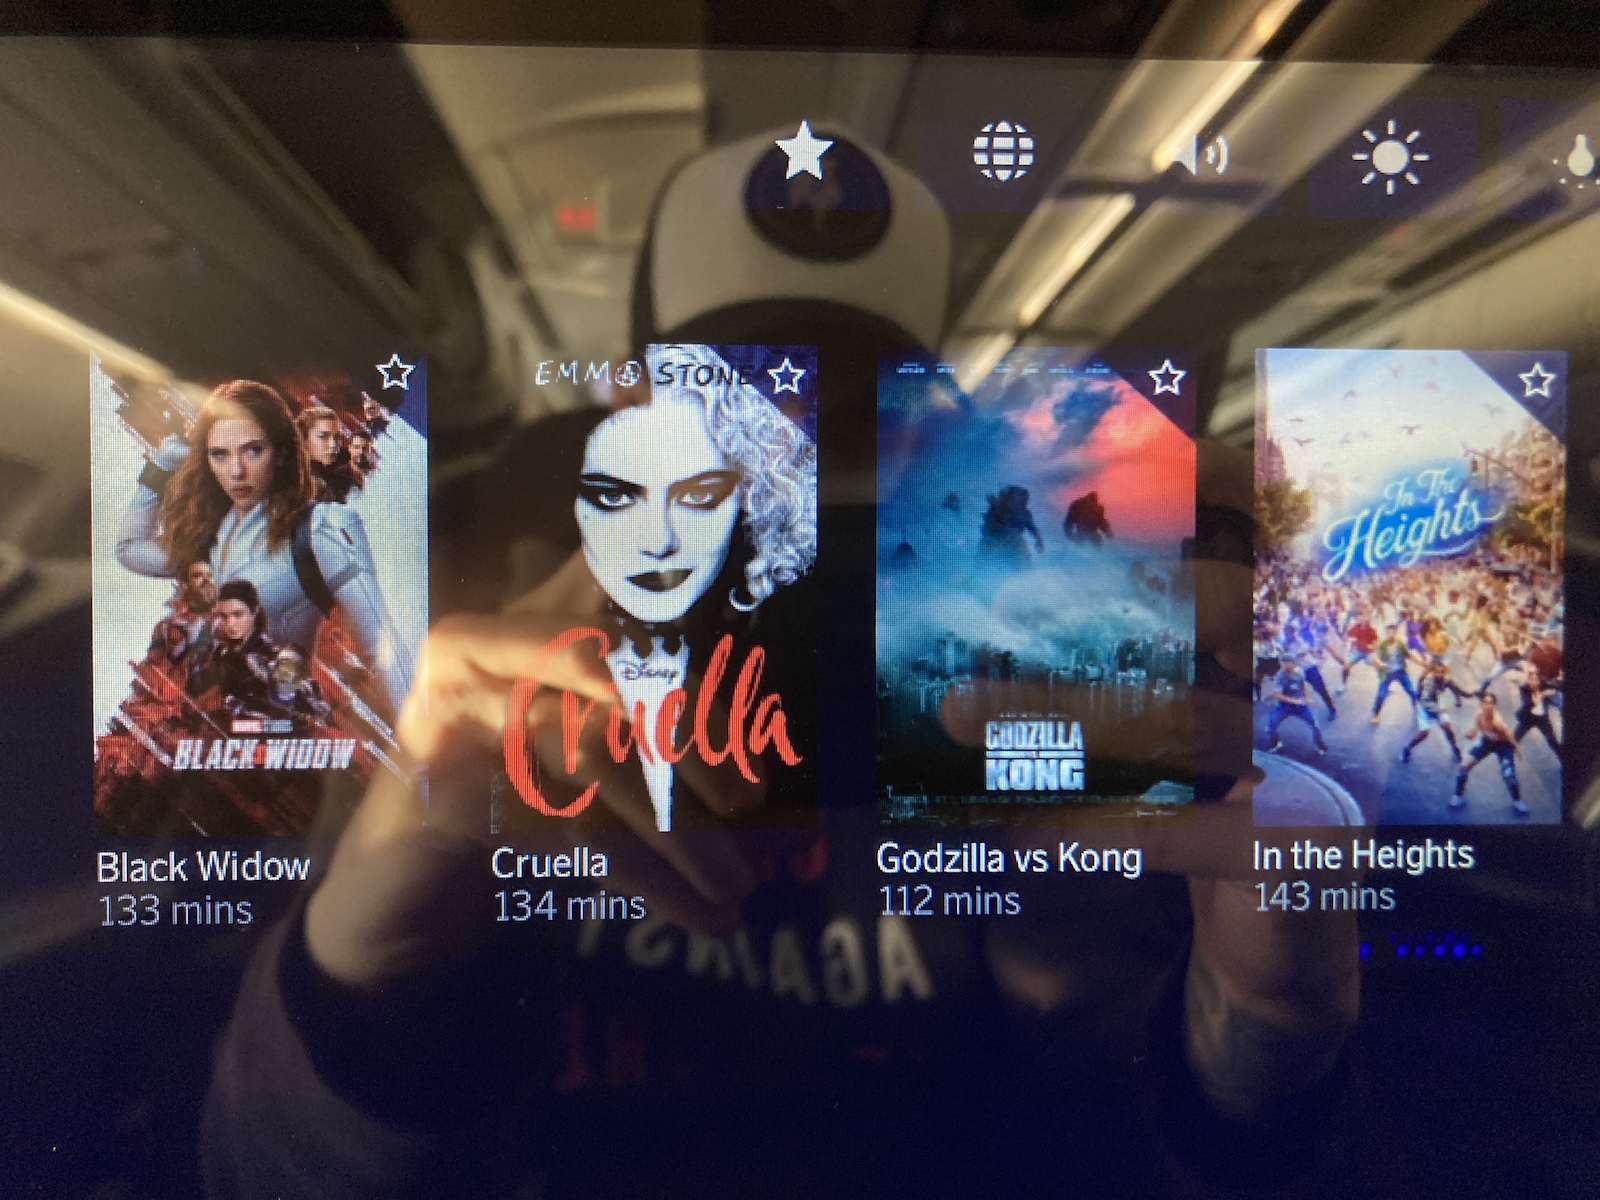 Image of movie options on SAS business class flight ARN-ORD, part of why my review is so negative.